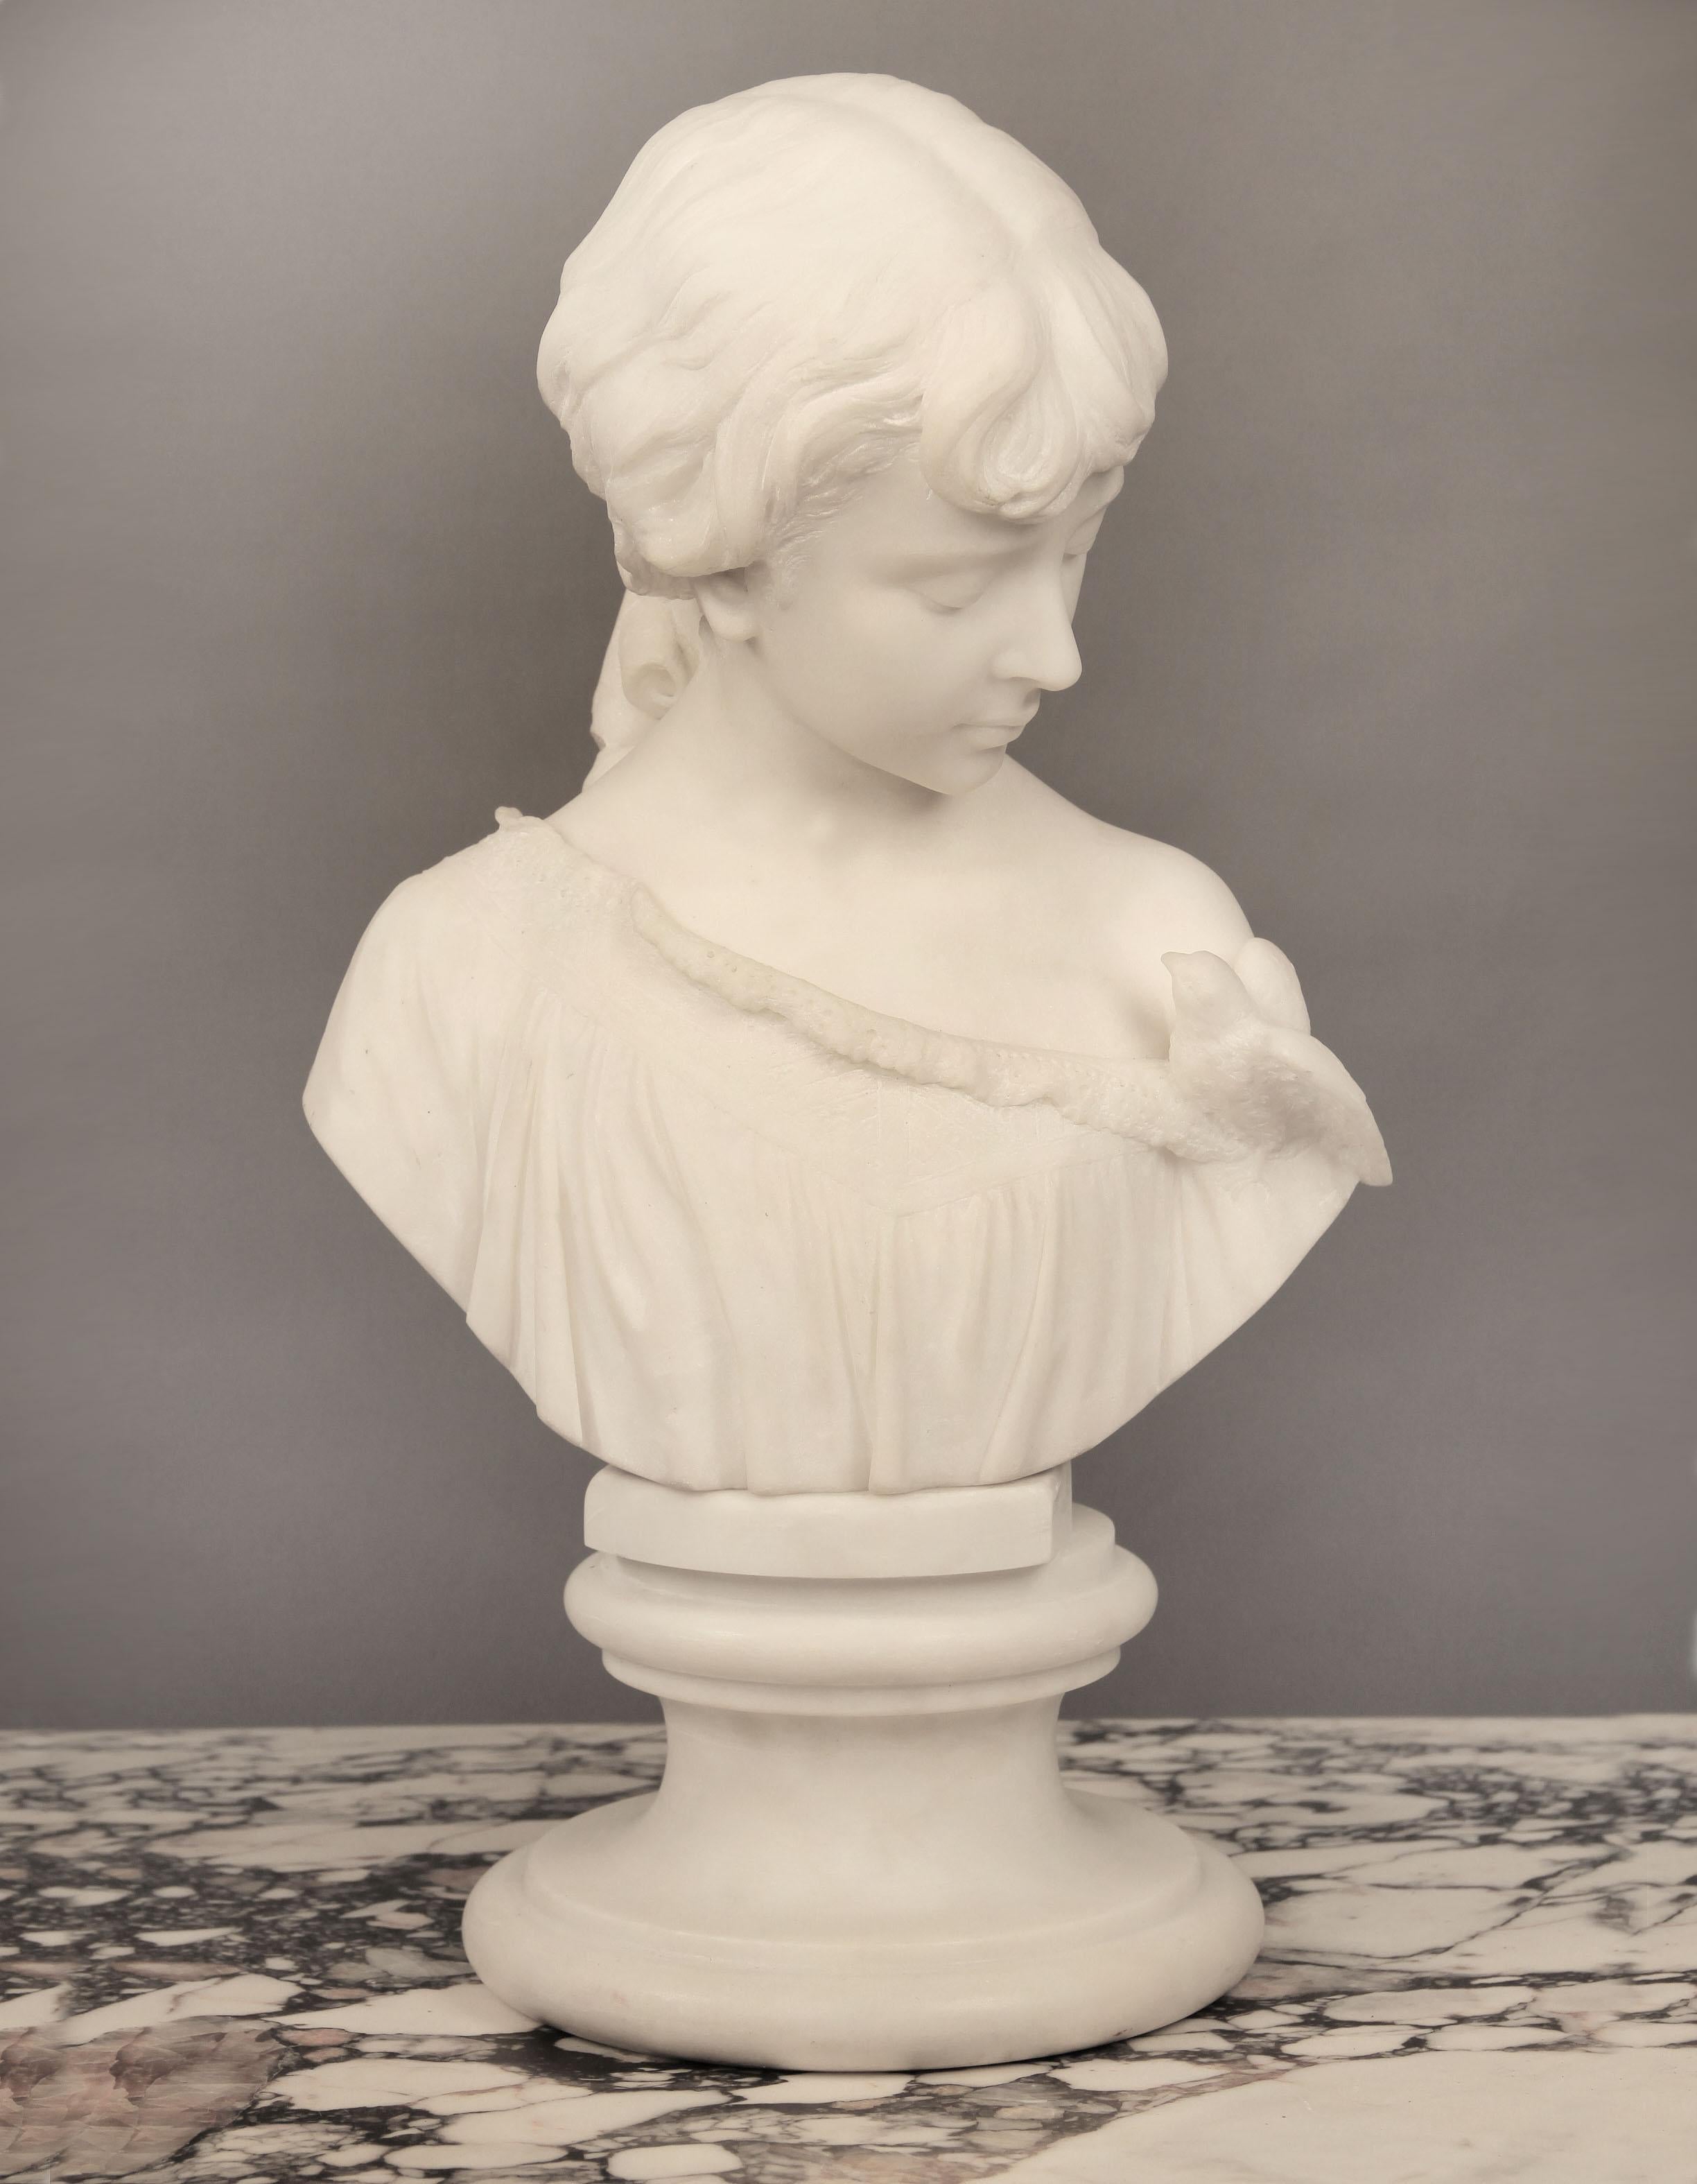 A Nice Late 19th Century Italian White Carrara Marble Bust of a Woman and a Dove by Pietro Bazzanti

The young lady and bird glaring at each other.

Signed Galleria P. Bazzanti, P. Gesti Firenze on the back.

Pietro Bazzanti was a central figure in